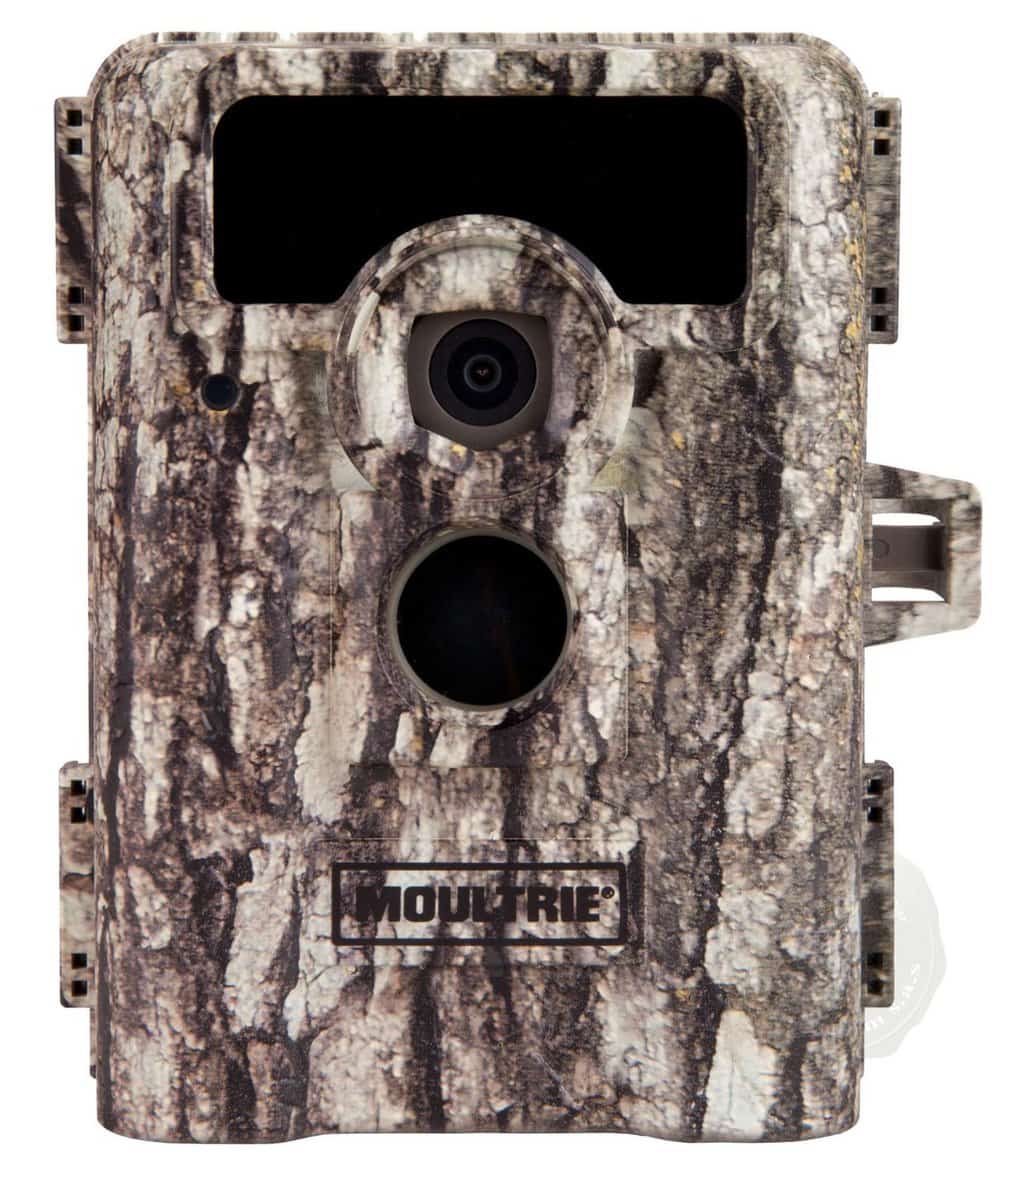 Moultrie D-555i Trail Camera Review